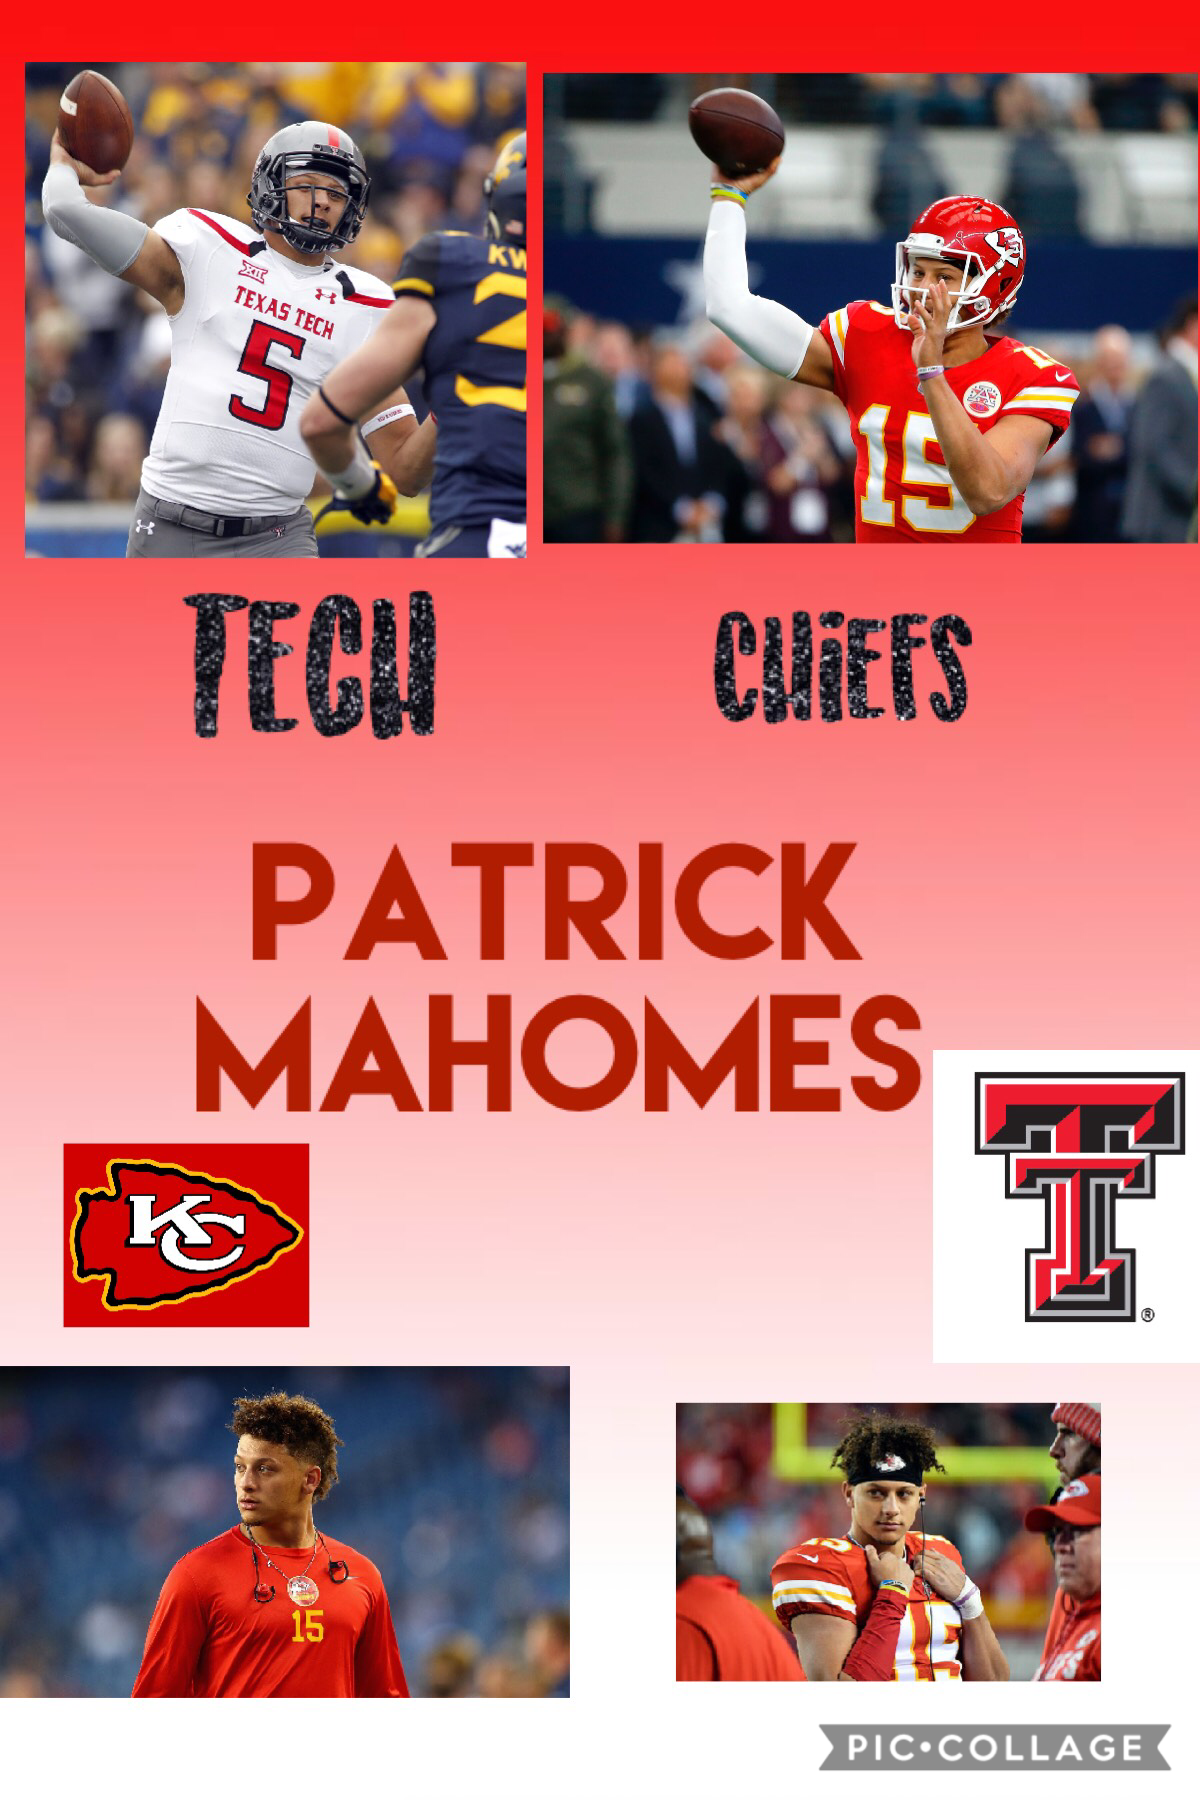 Do y’all know Patrick Mahomes? I do! He is awesome! He played for tech and now he played for the chiefs! Fun fact: he also played baseball for tech! 